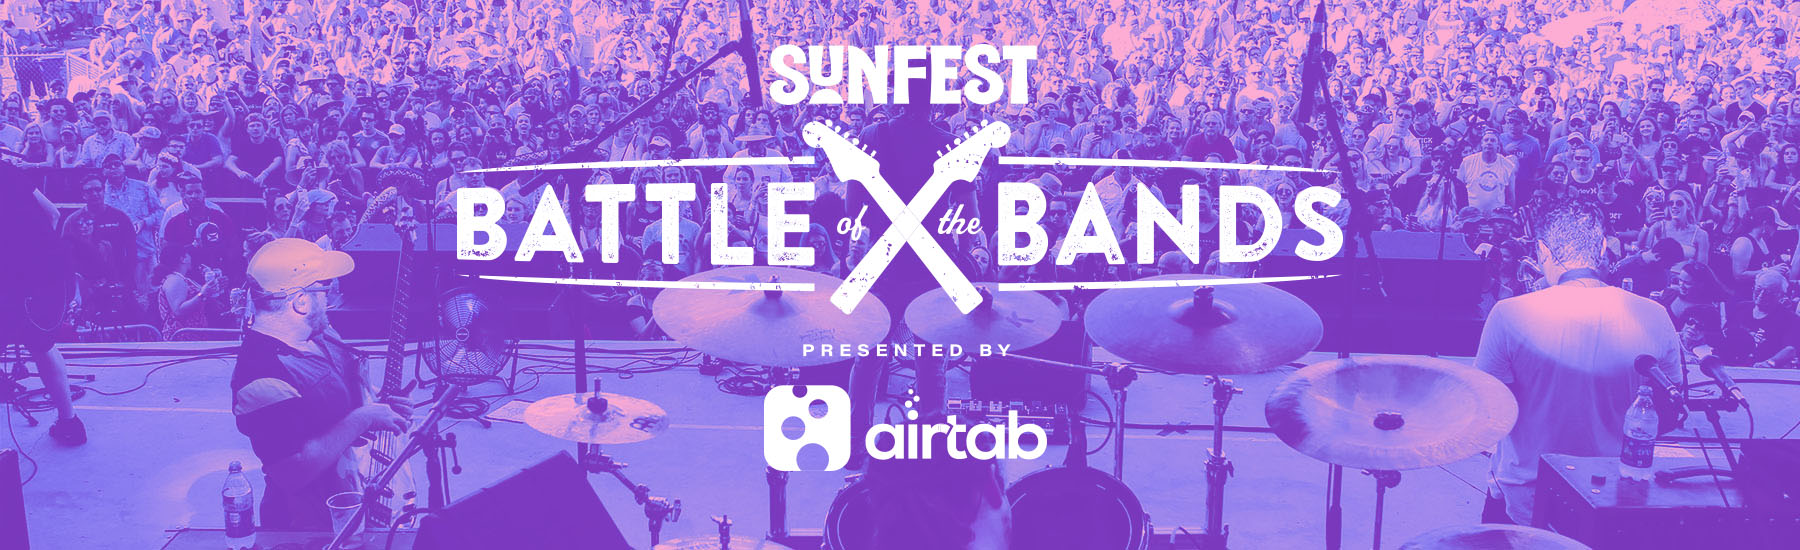 battle of the bands logo and image